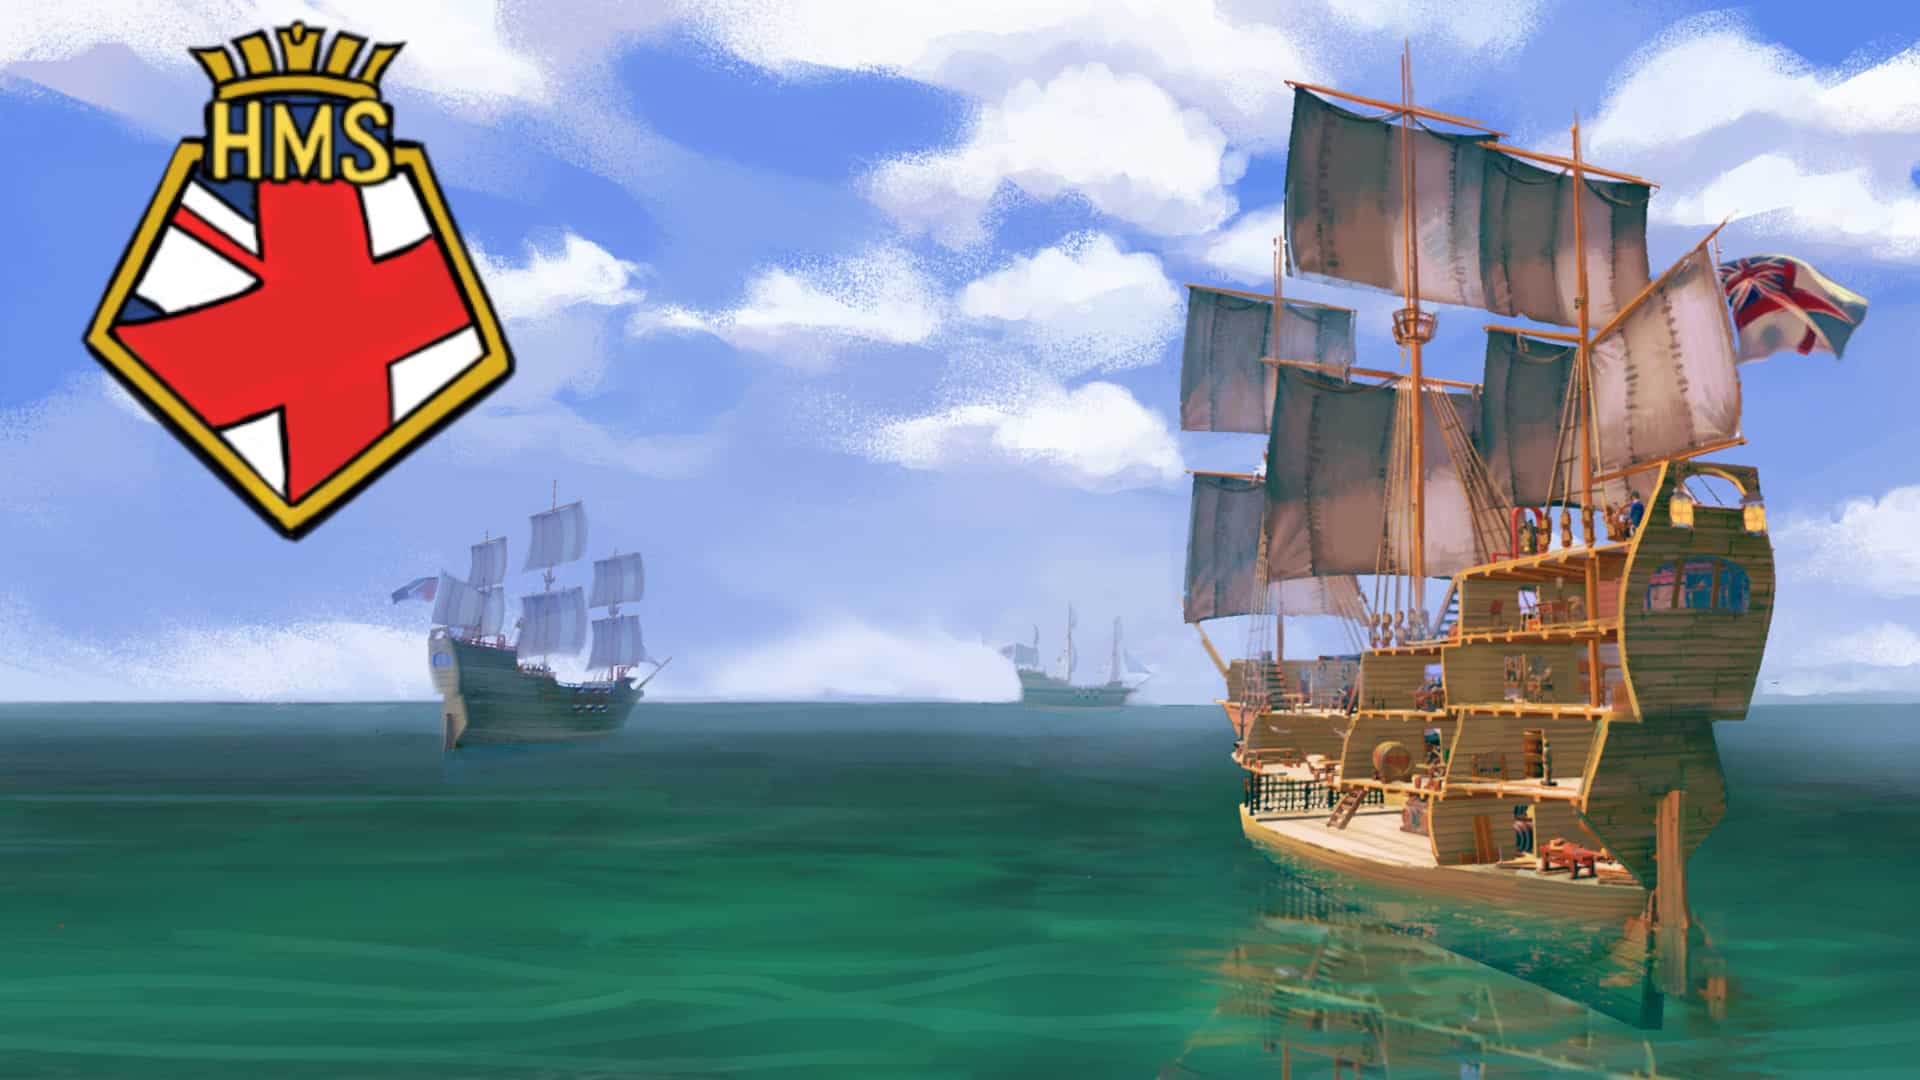 Her Majesty’s Ship player count stats